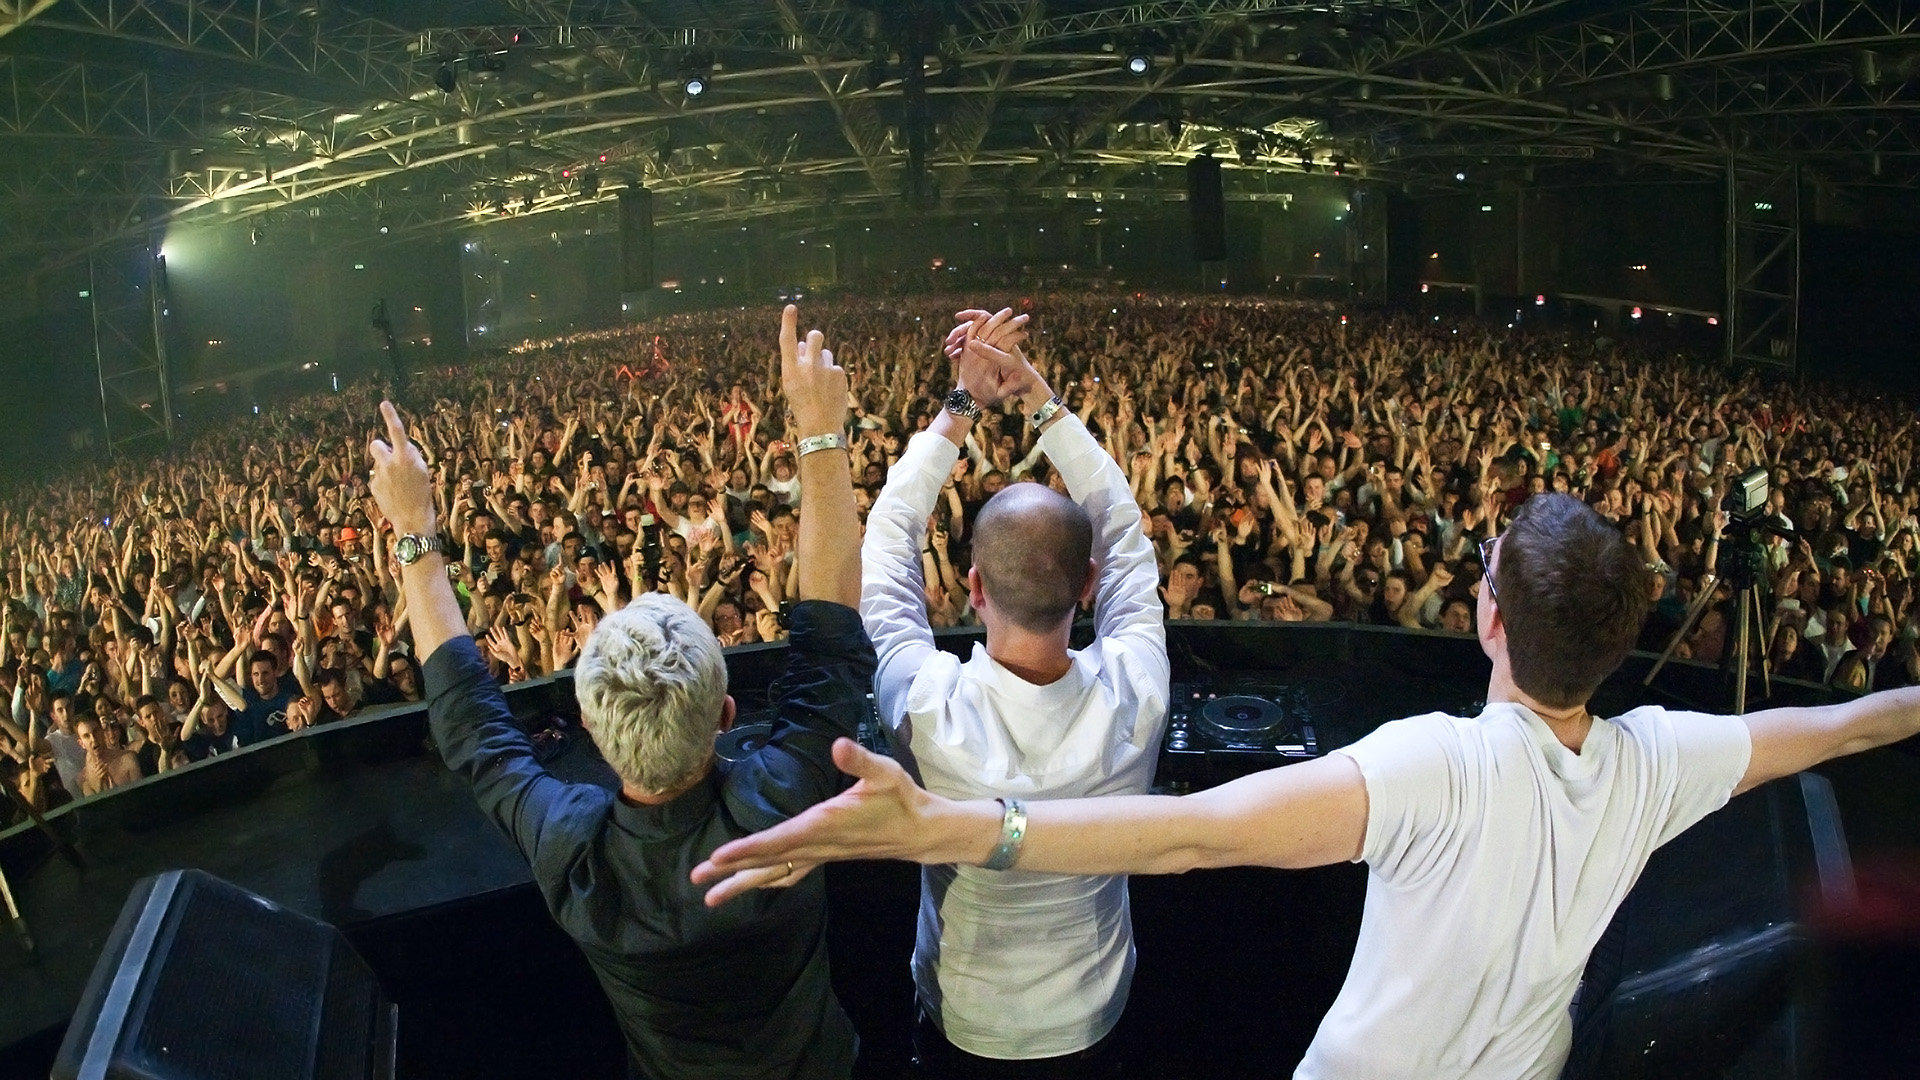 Above & Beyond is an English electronic music group